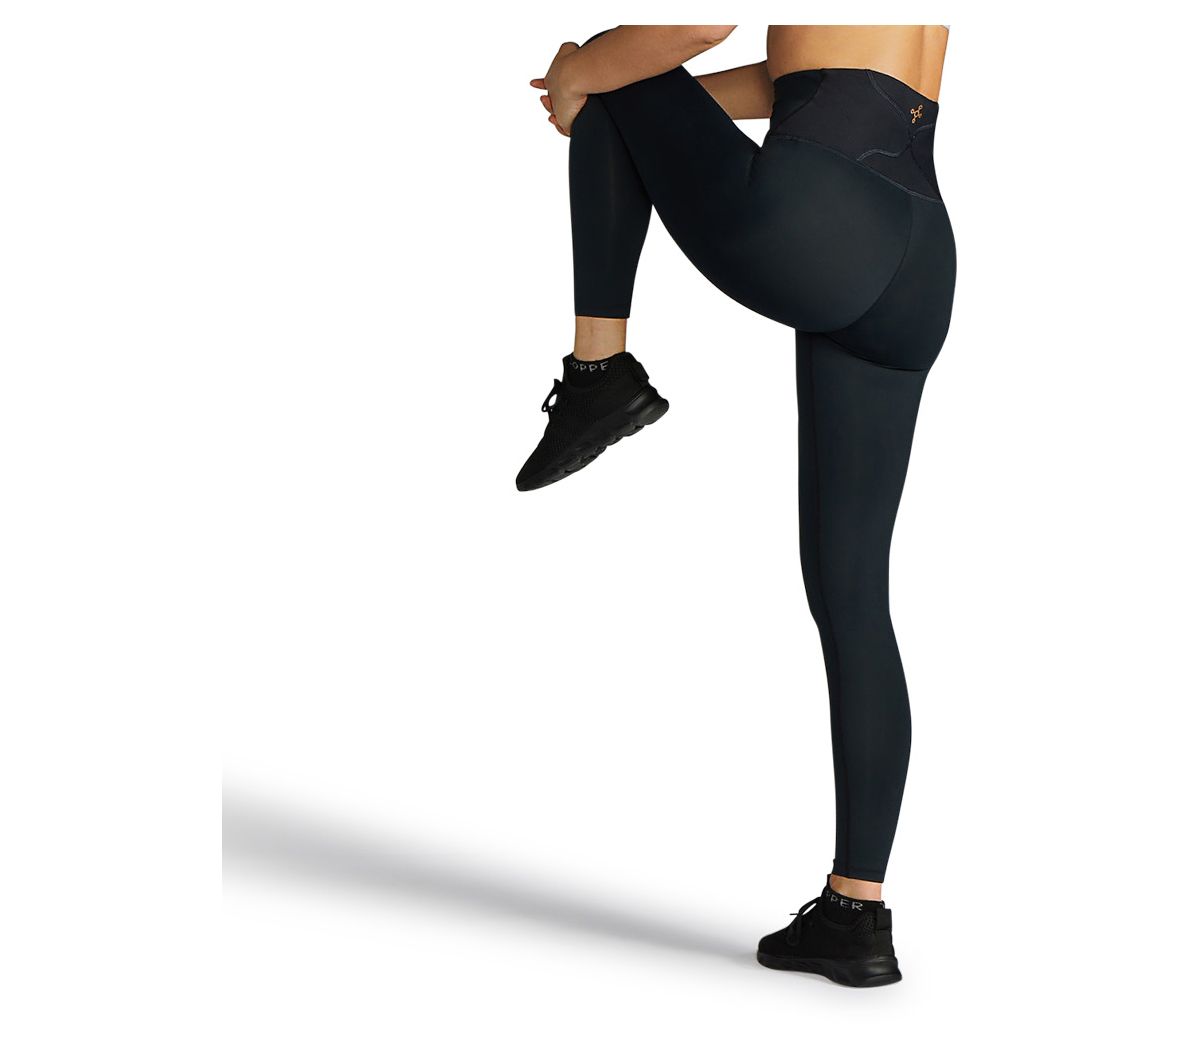 Tommie Copper Lower Back Support Compression Leggings 